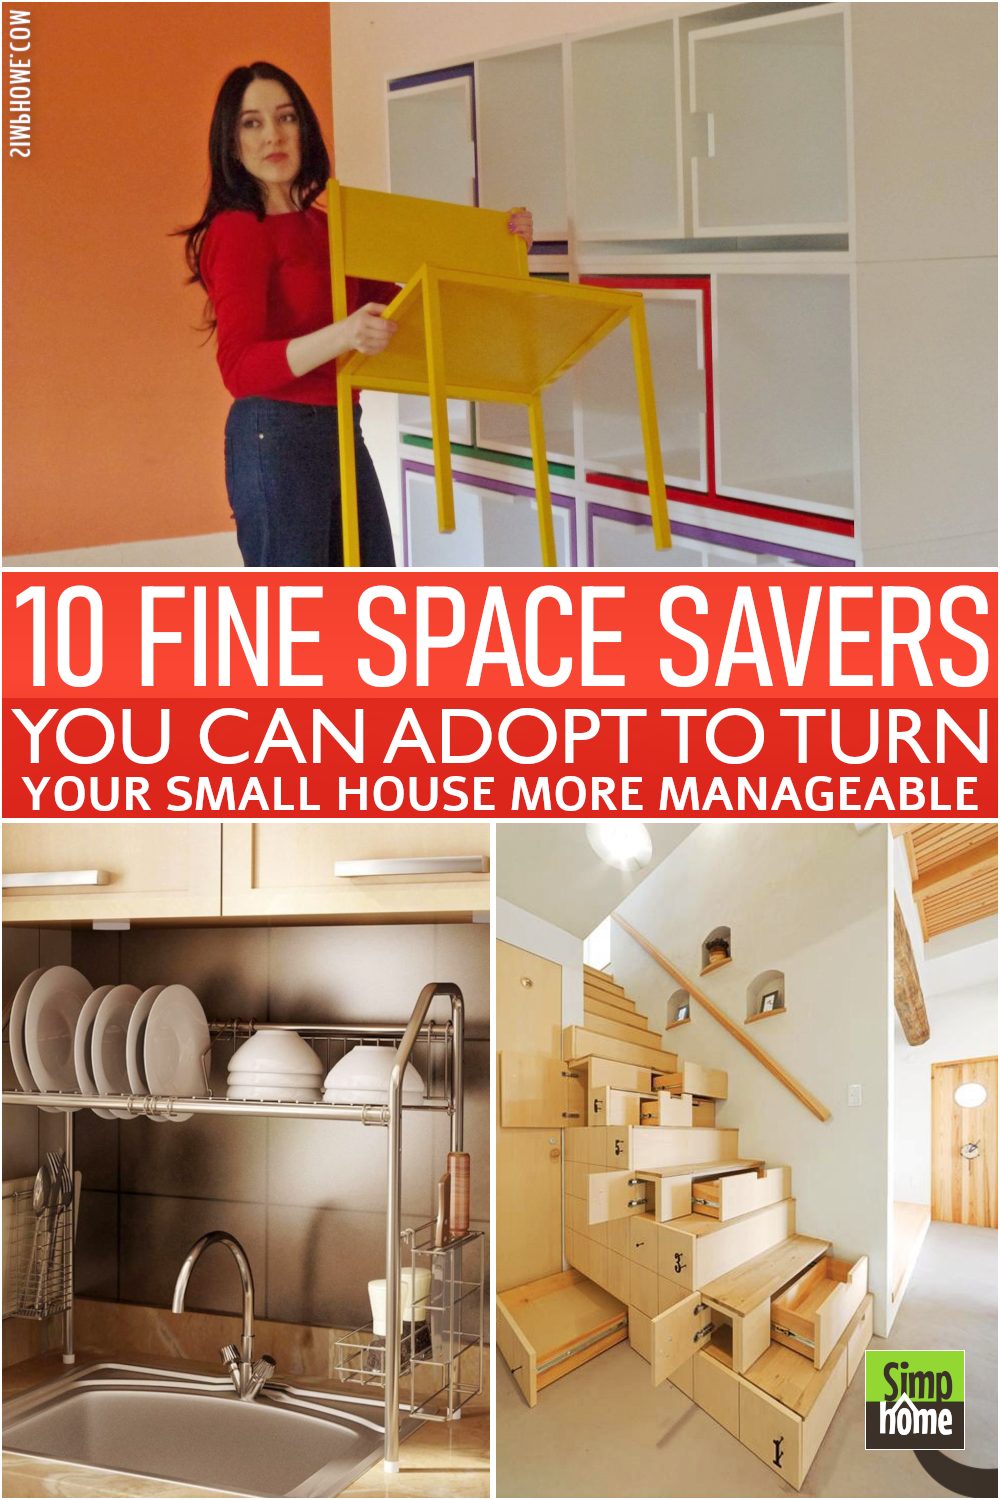 This is 10 Ingenious Space Savers for Small Homes Poster from Simphome